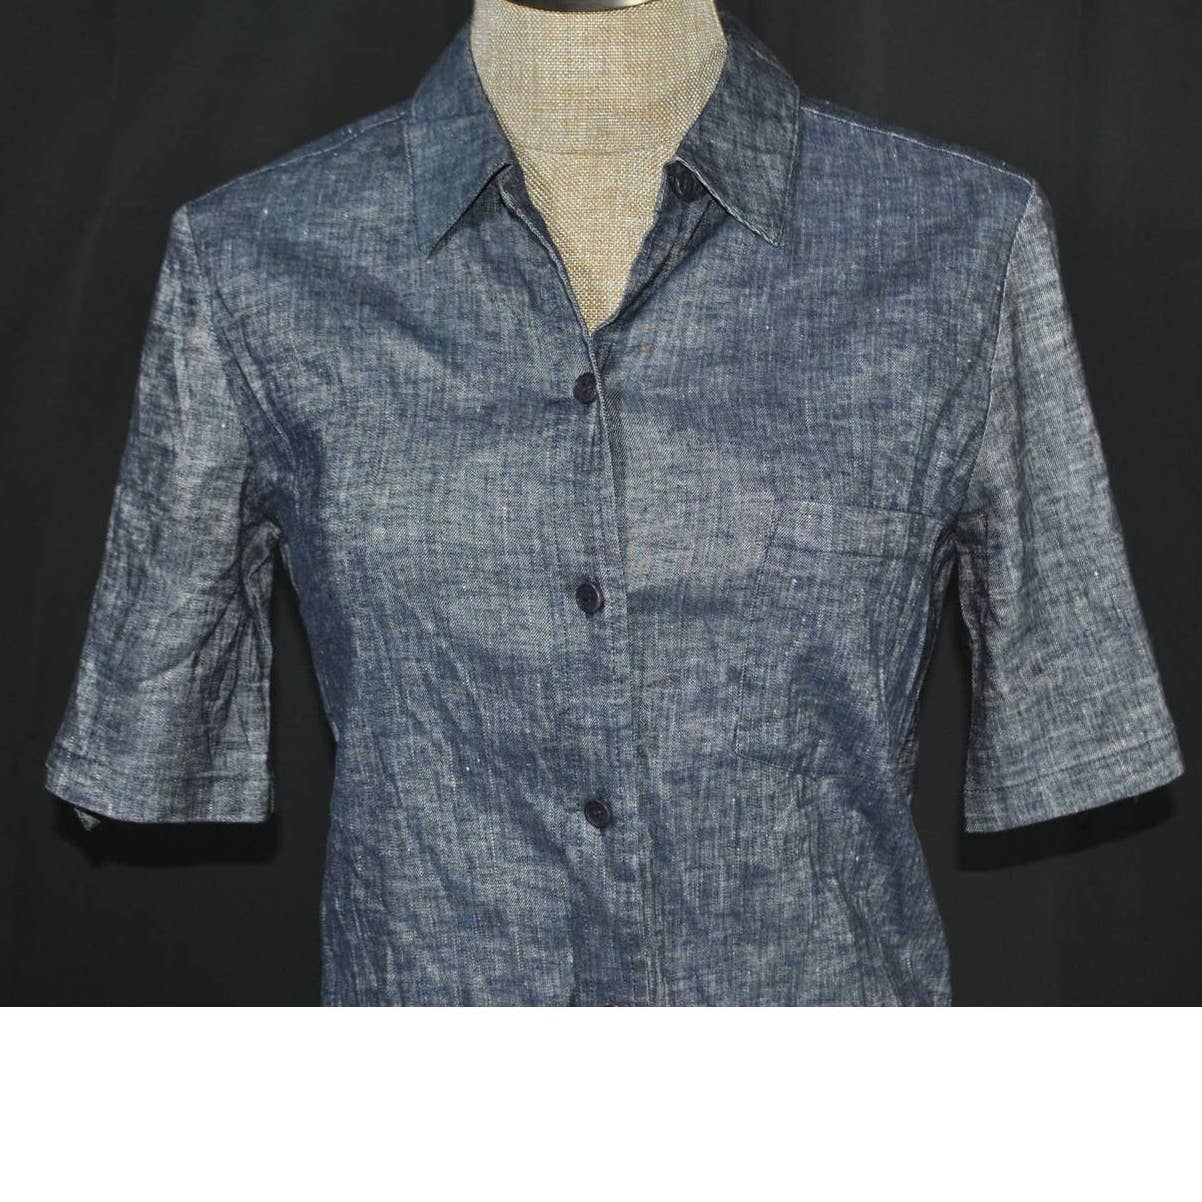 Theory Chambray Blue Short Sleeve Button Up Top -M